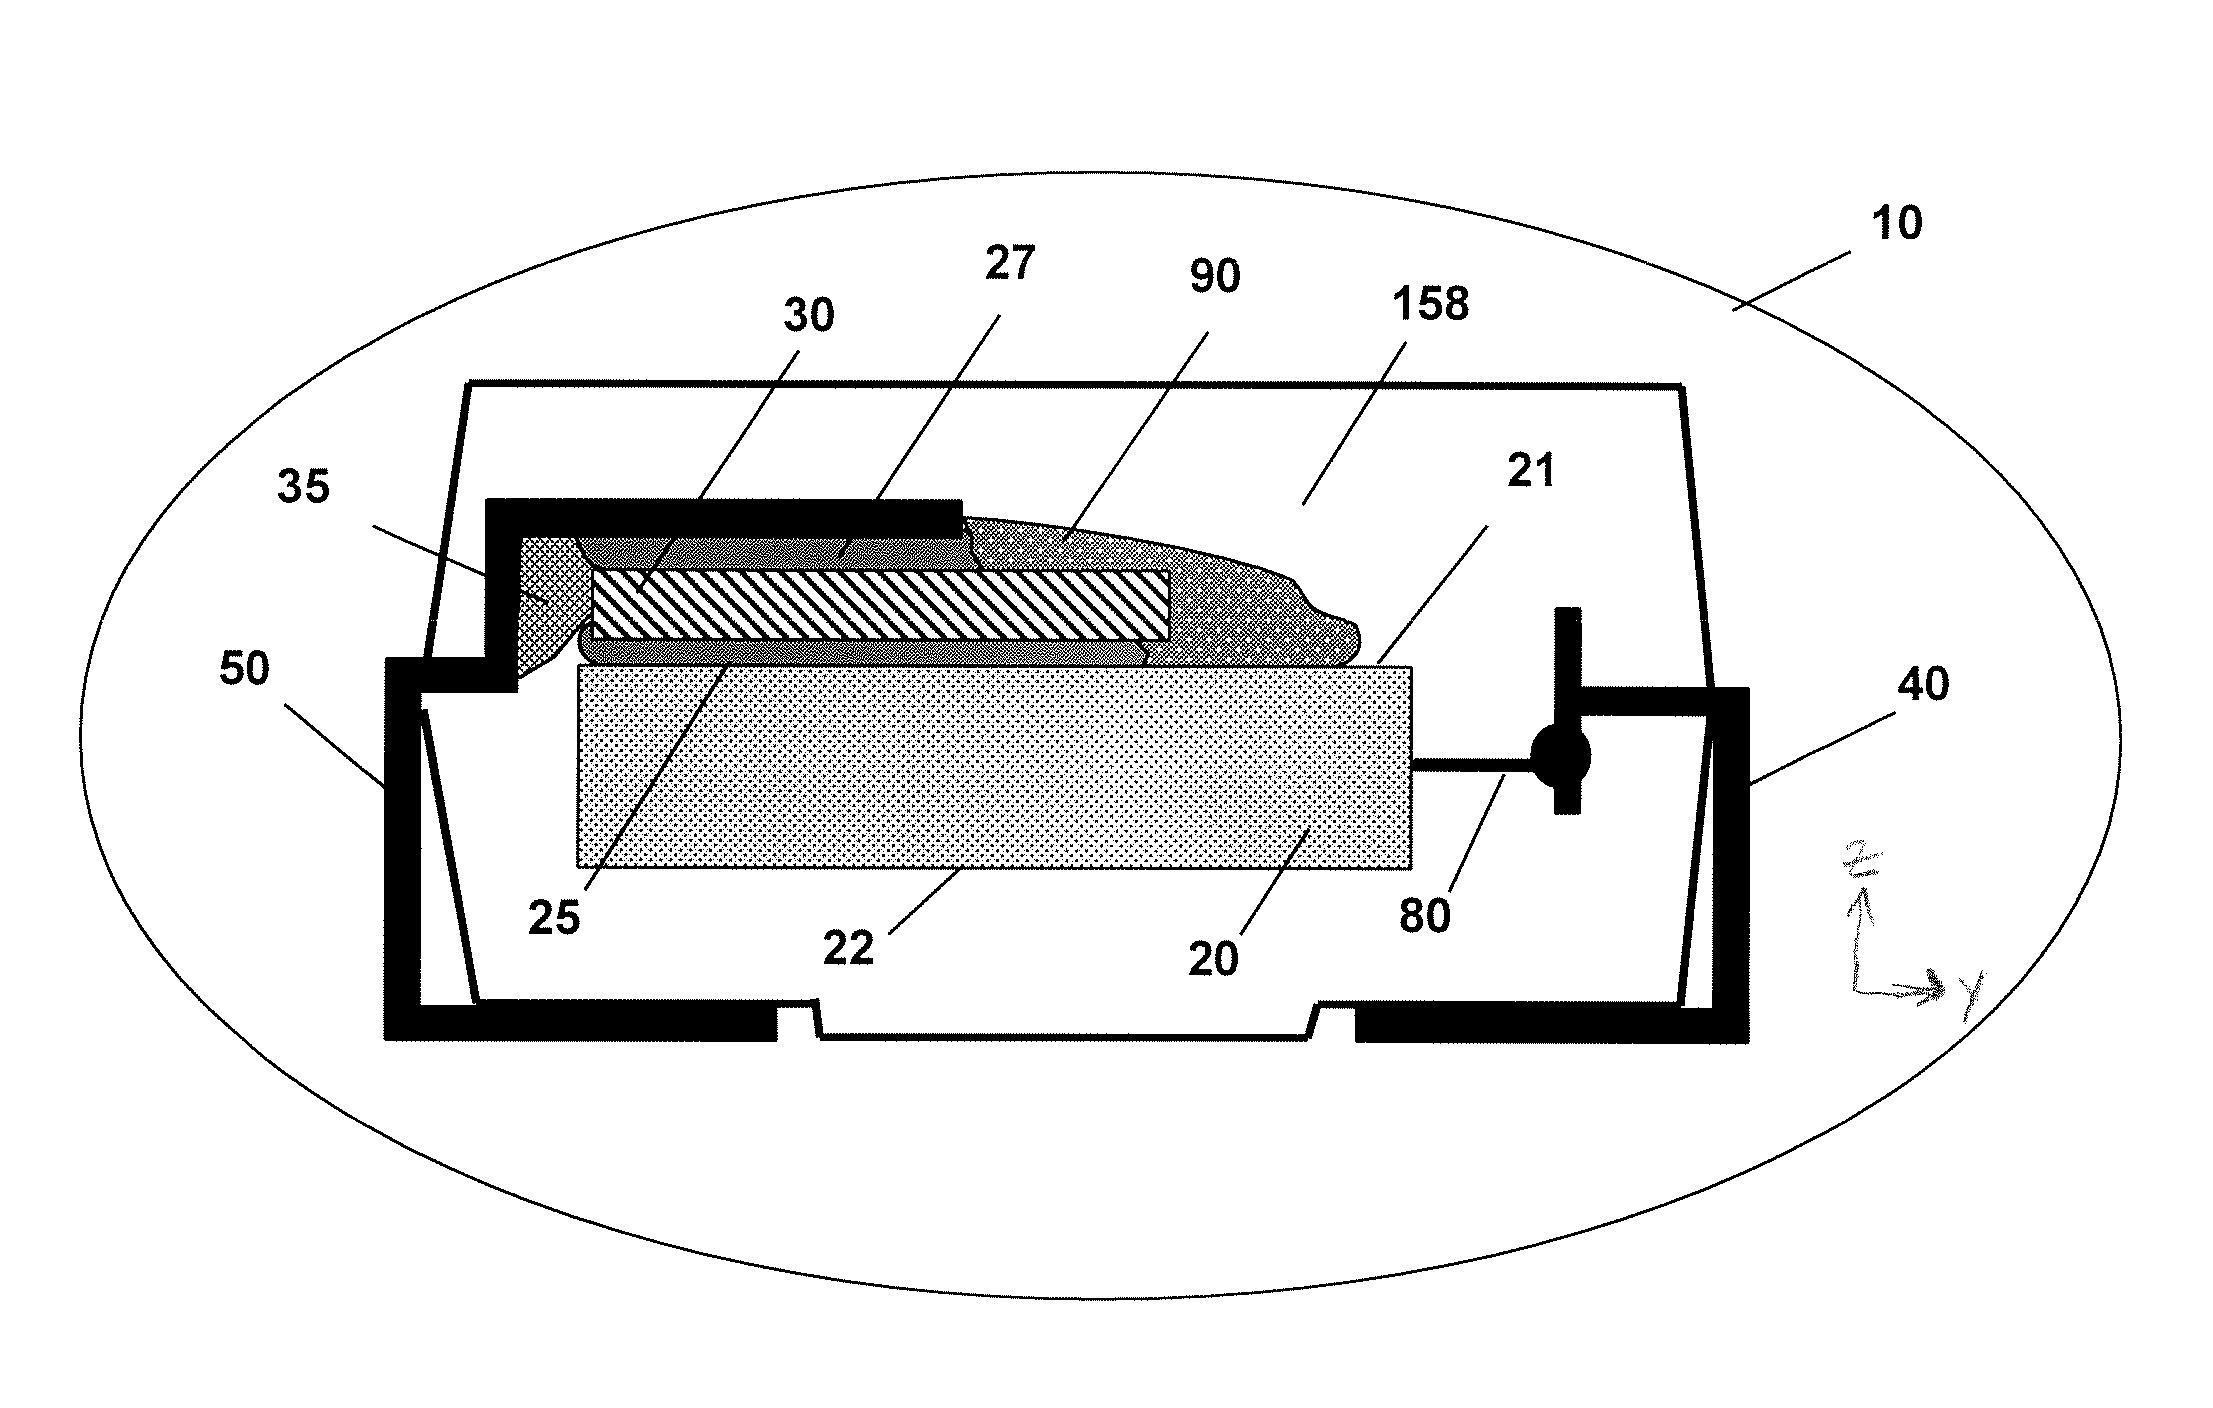 Electrolytic capacitor assembly containing a resettable fuse